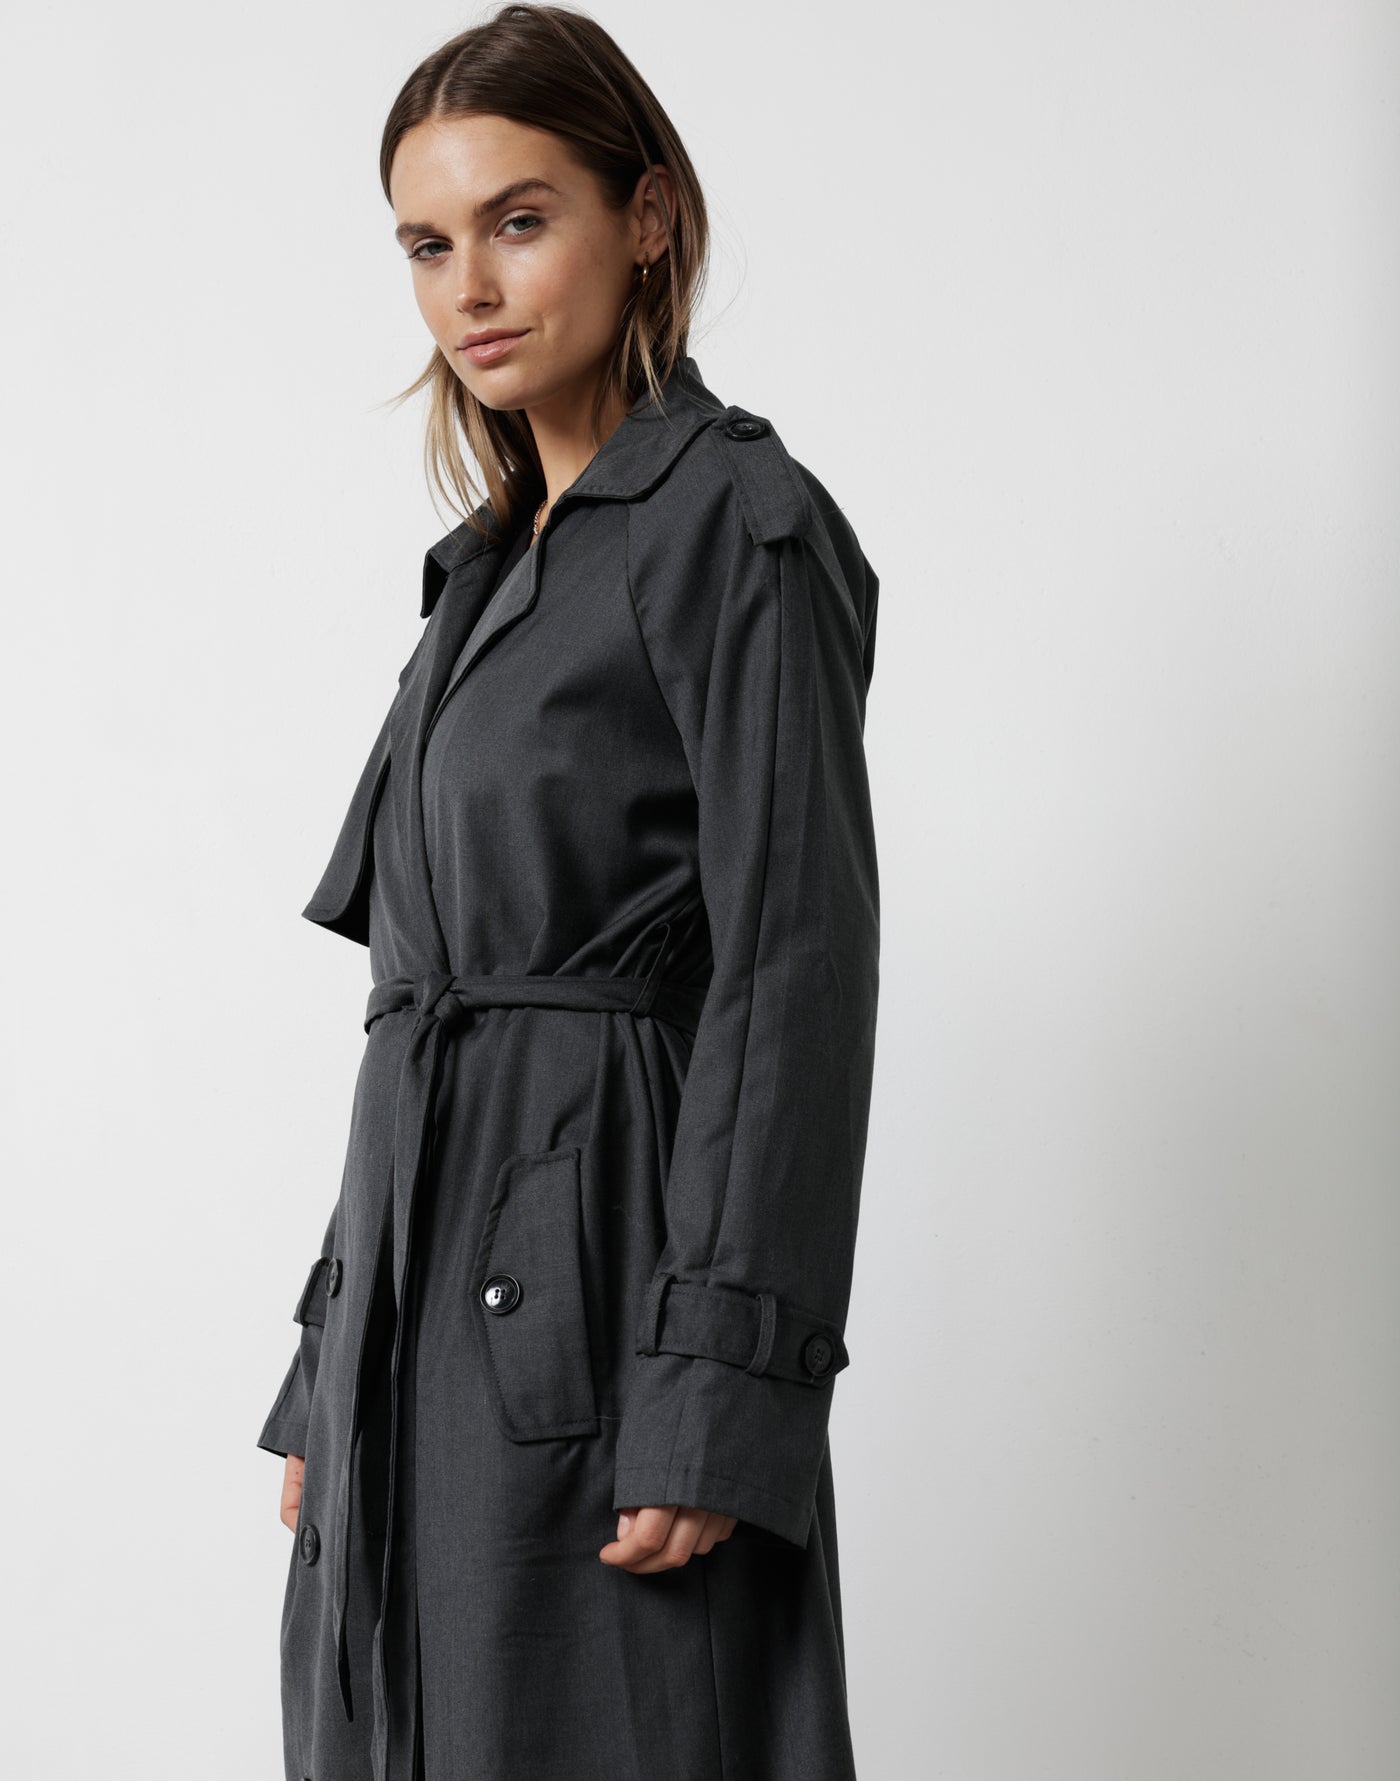 Jericho Trench Coat (Charcoal) - Charcoal Grey Trench Coat - Women's Outerwear - Charcoal Clothing